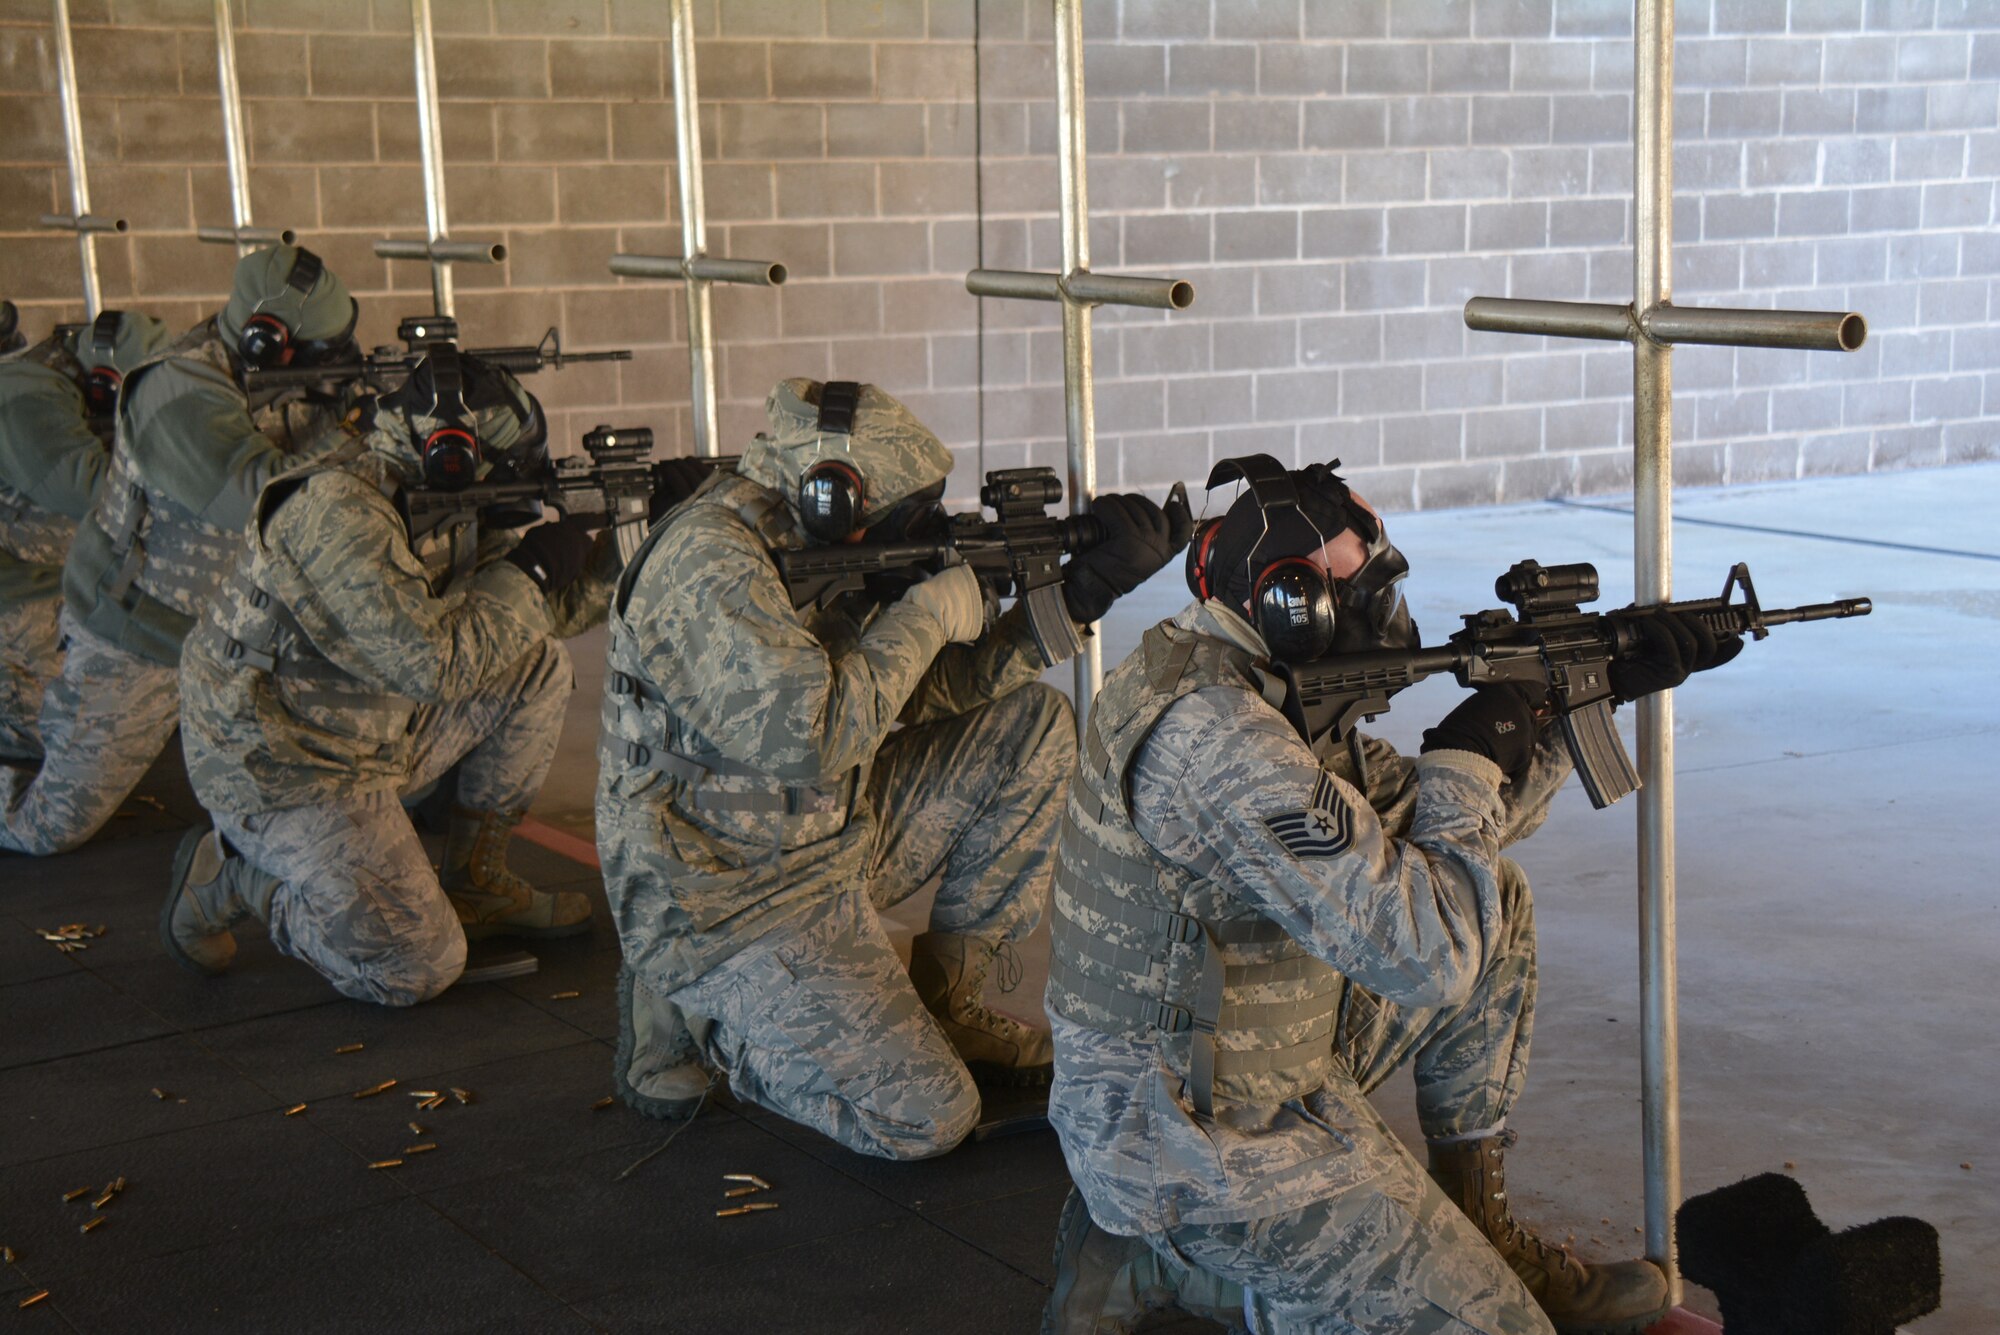 Members of the 507th Air Refueling Wing wear gas masks and cold weather gear while firing the M-4 carbine in below-freezing temperatures Jan. 10, 2016, at the firing range at Tinker Air Force Base, Okla. The Reservists must shoot at targets from a multitude of positions in order to demonstrate agility in their defense capabilities. (U.S. Air Force photo/Tech. Sgt. Charles Taylor)
